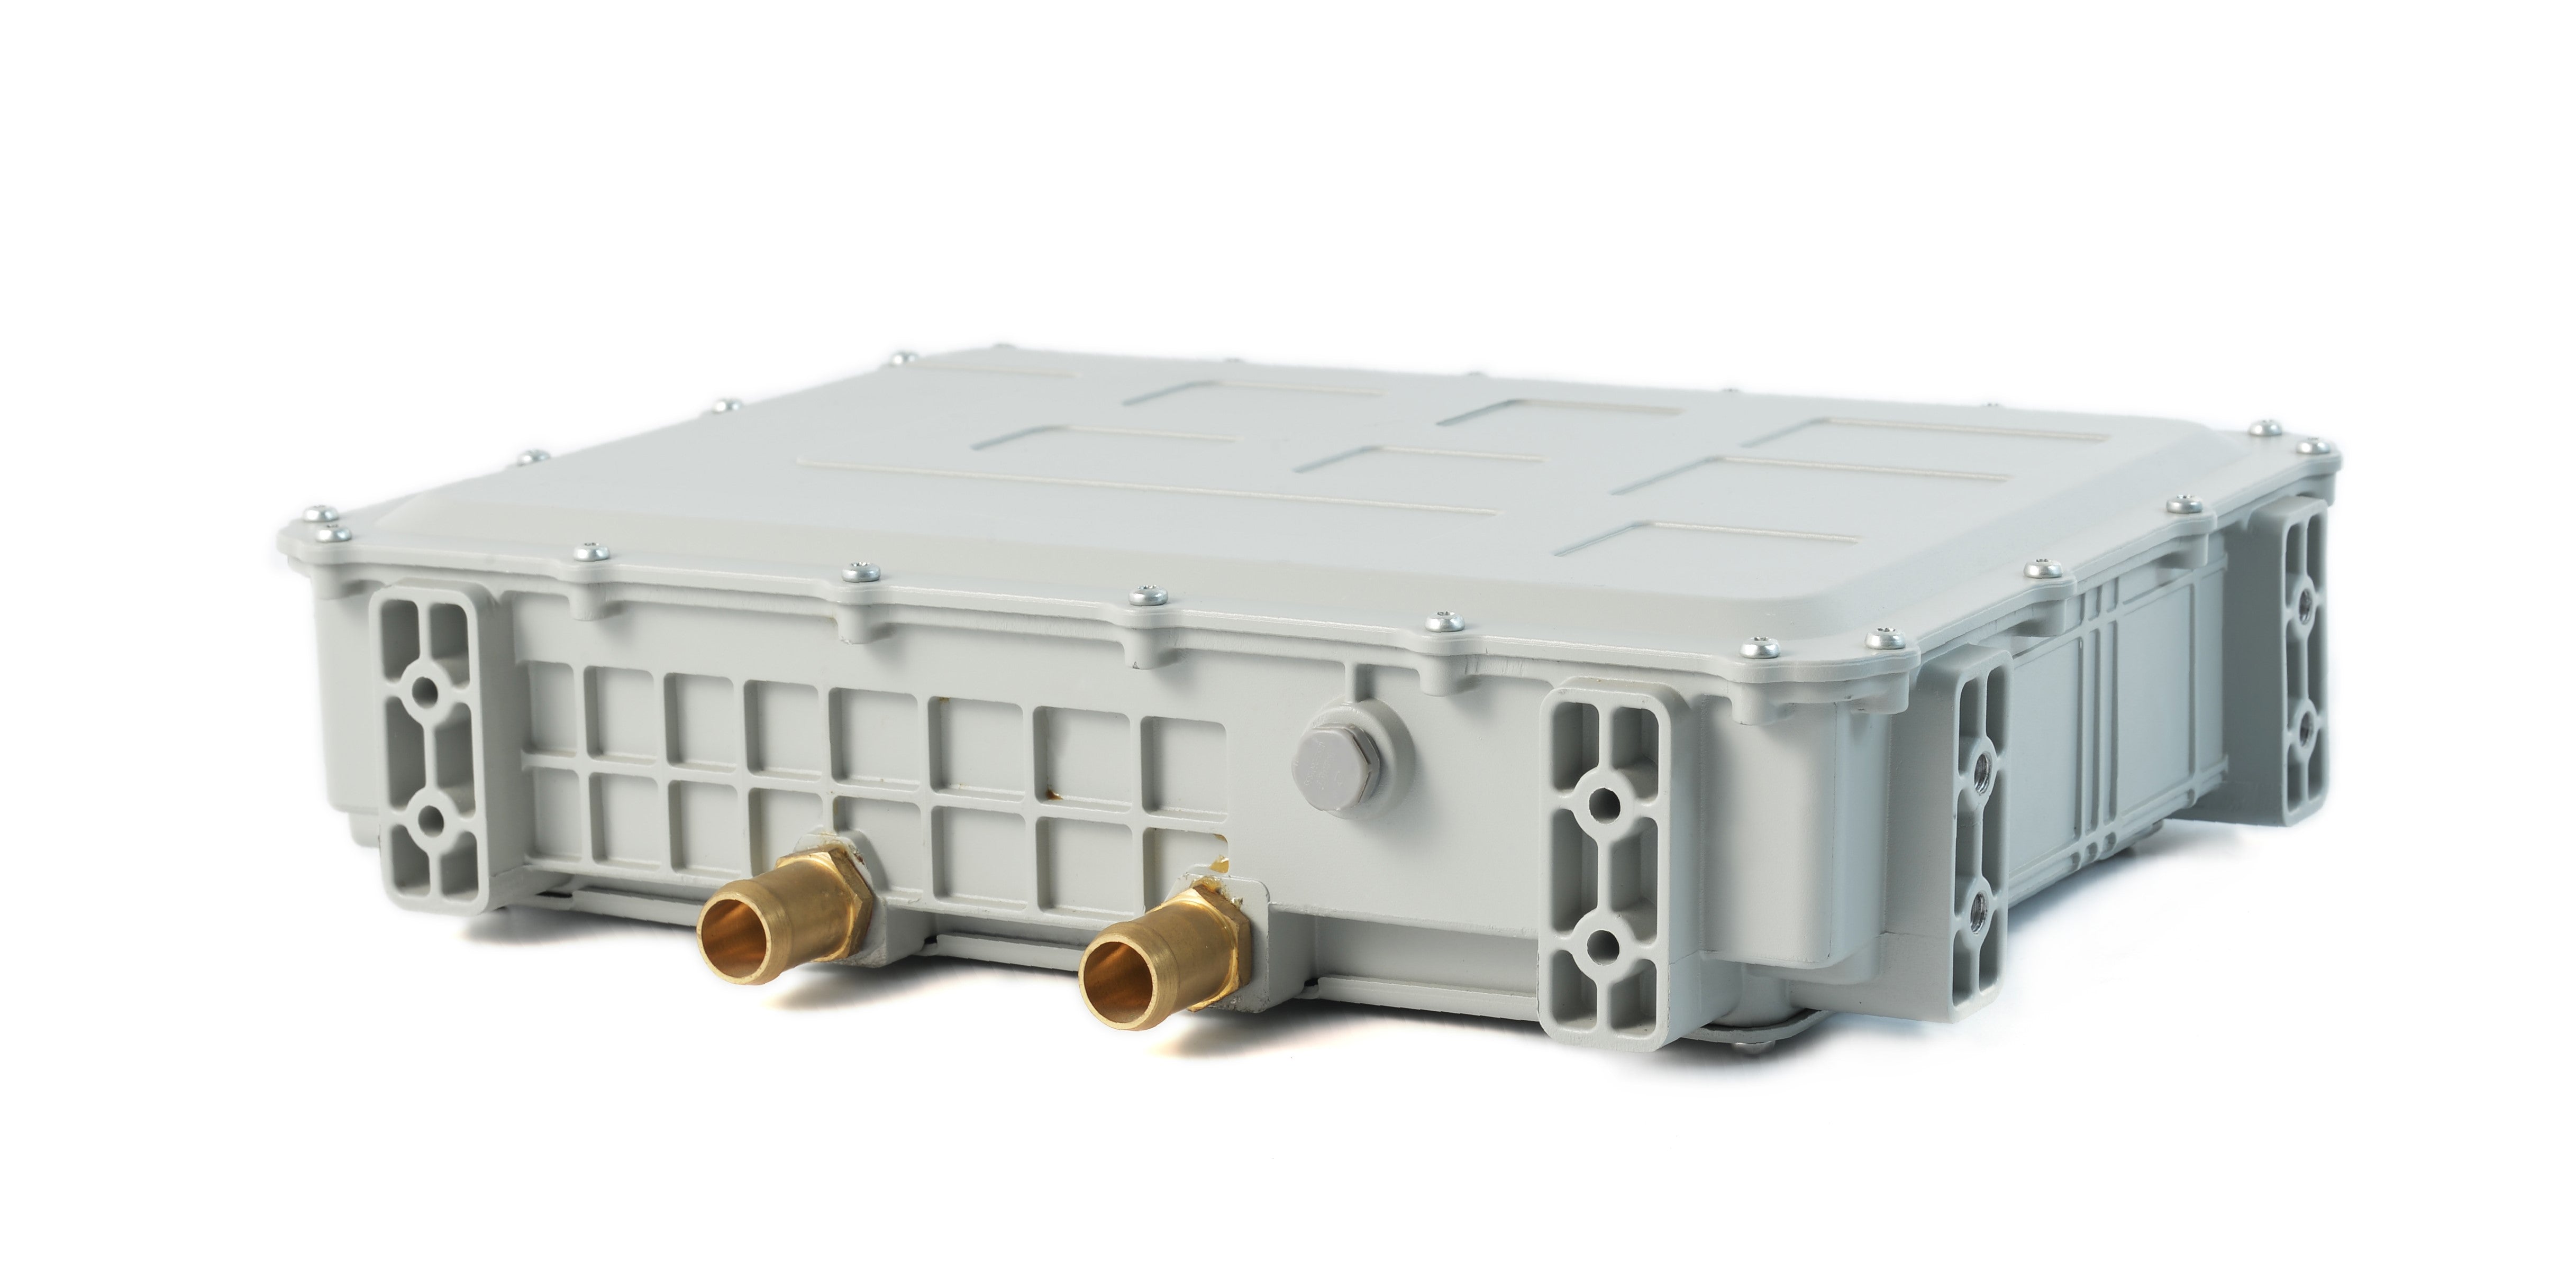 Ovartech 6.6kW Charger with an integrated 1.5 kW DC-DC Converter - Back View, two cooling ports are depicted